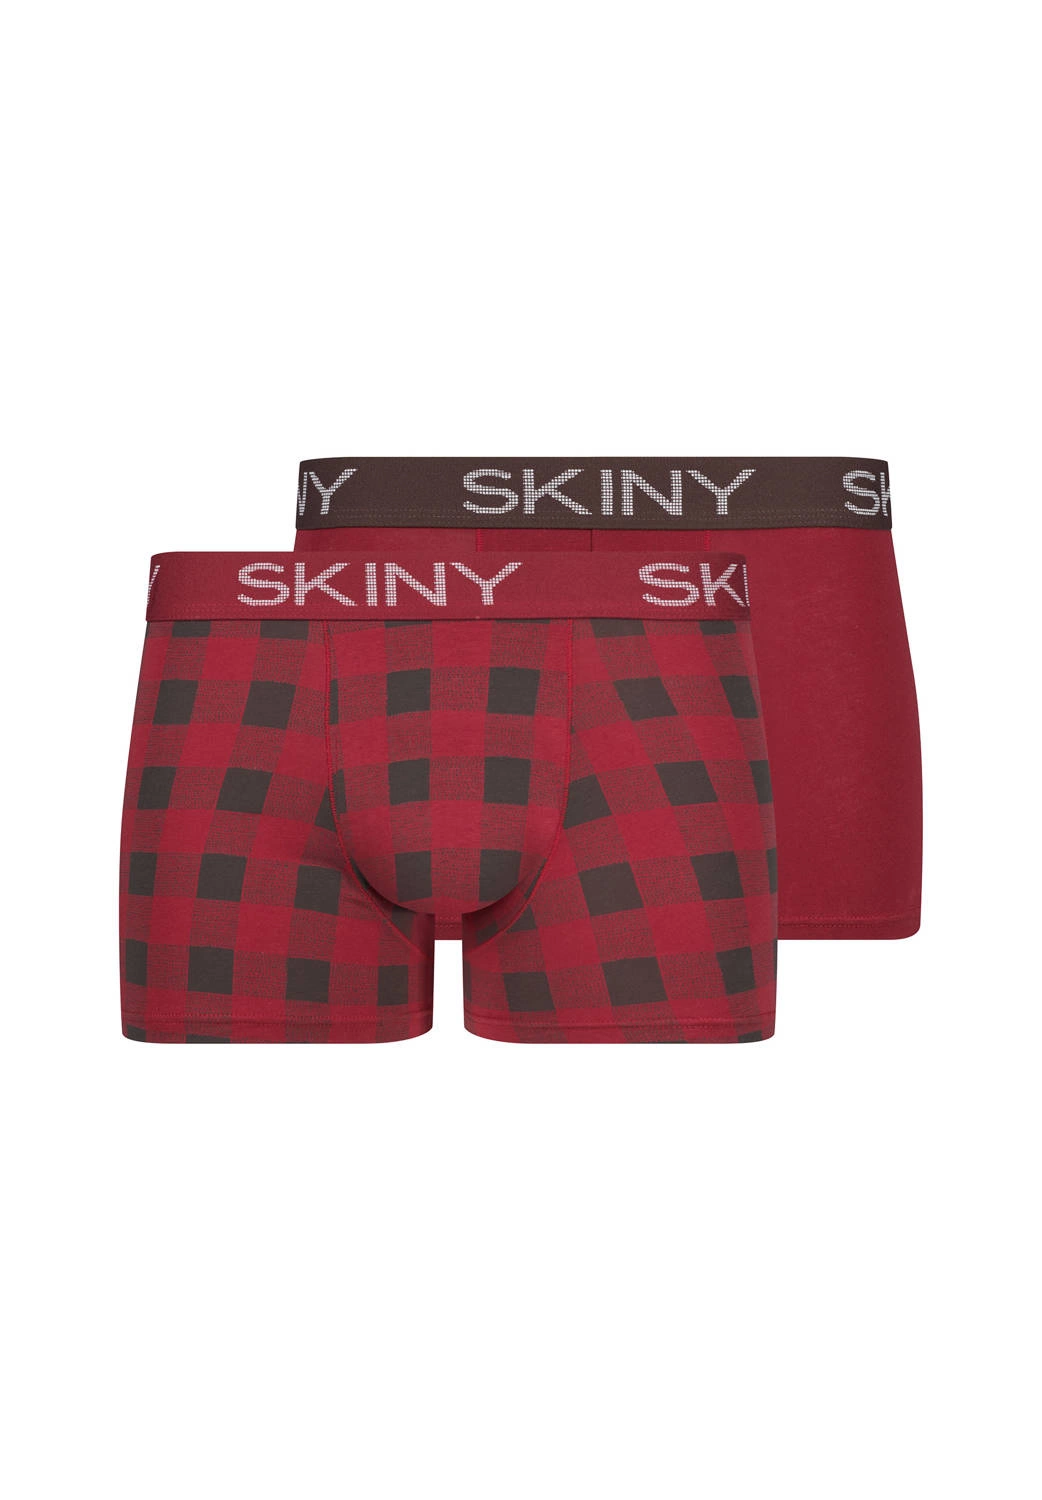 3 pack of men's briefs Skiny multicolored 086839